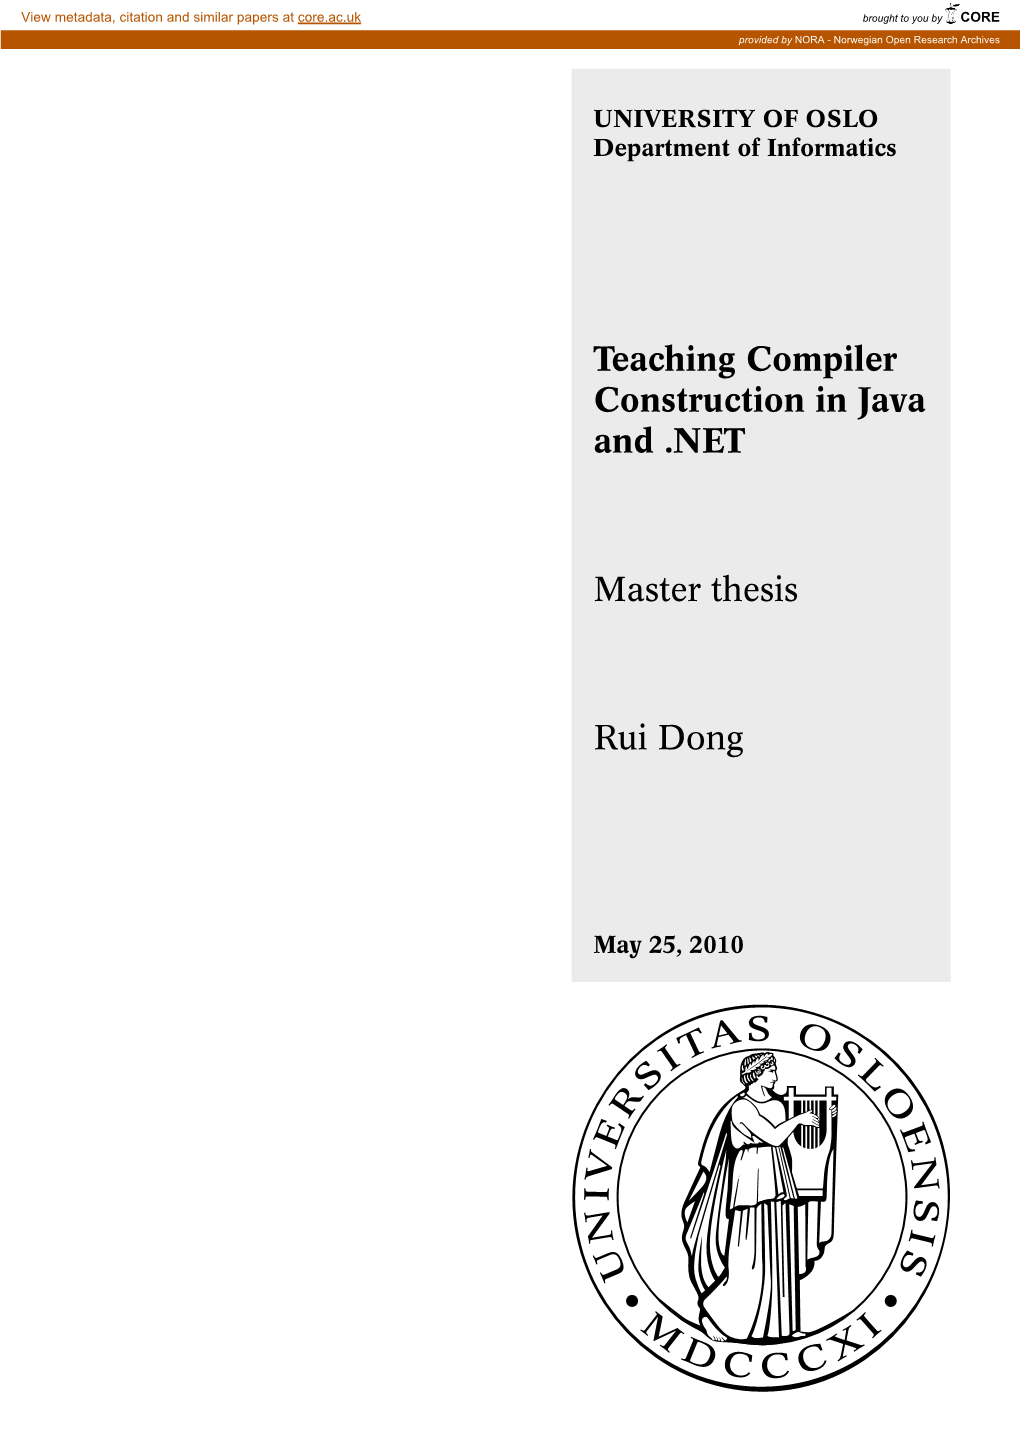 Teaching Compiler Construction in Java and .NET Master Thesis Rui